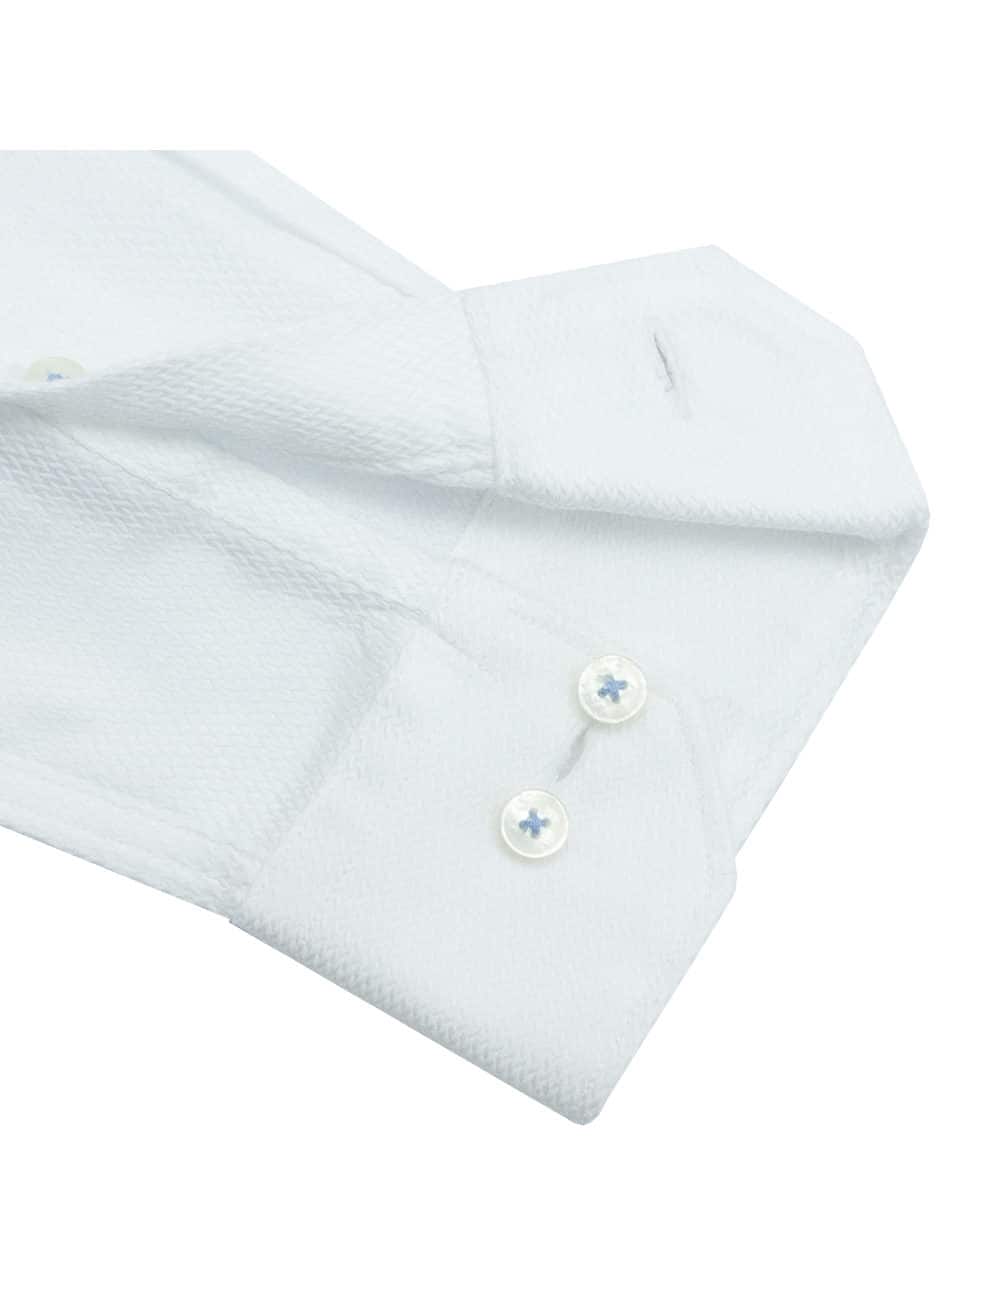 Tailored Fit Solid White Dobby 2 Ply 100% Premium Pima Cotton Double-Ply Long Sleeve Single Cuff Shirt TF2A9.17